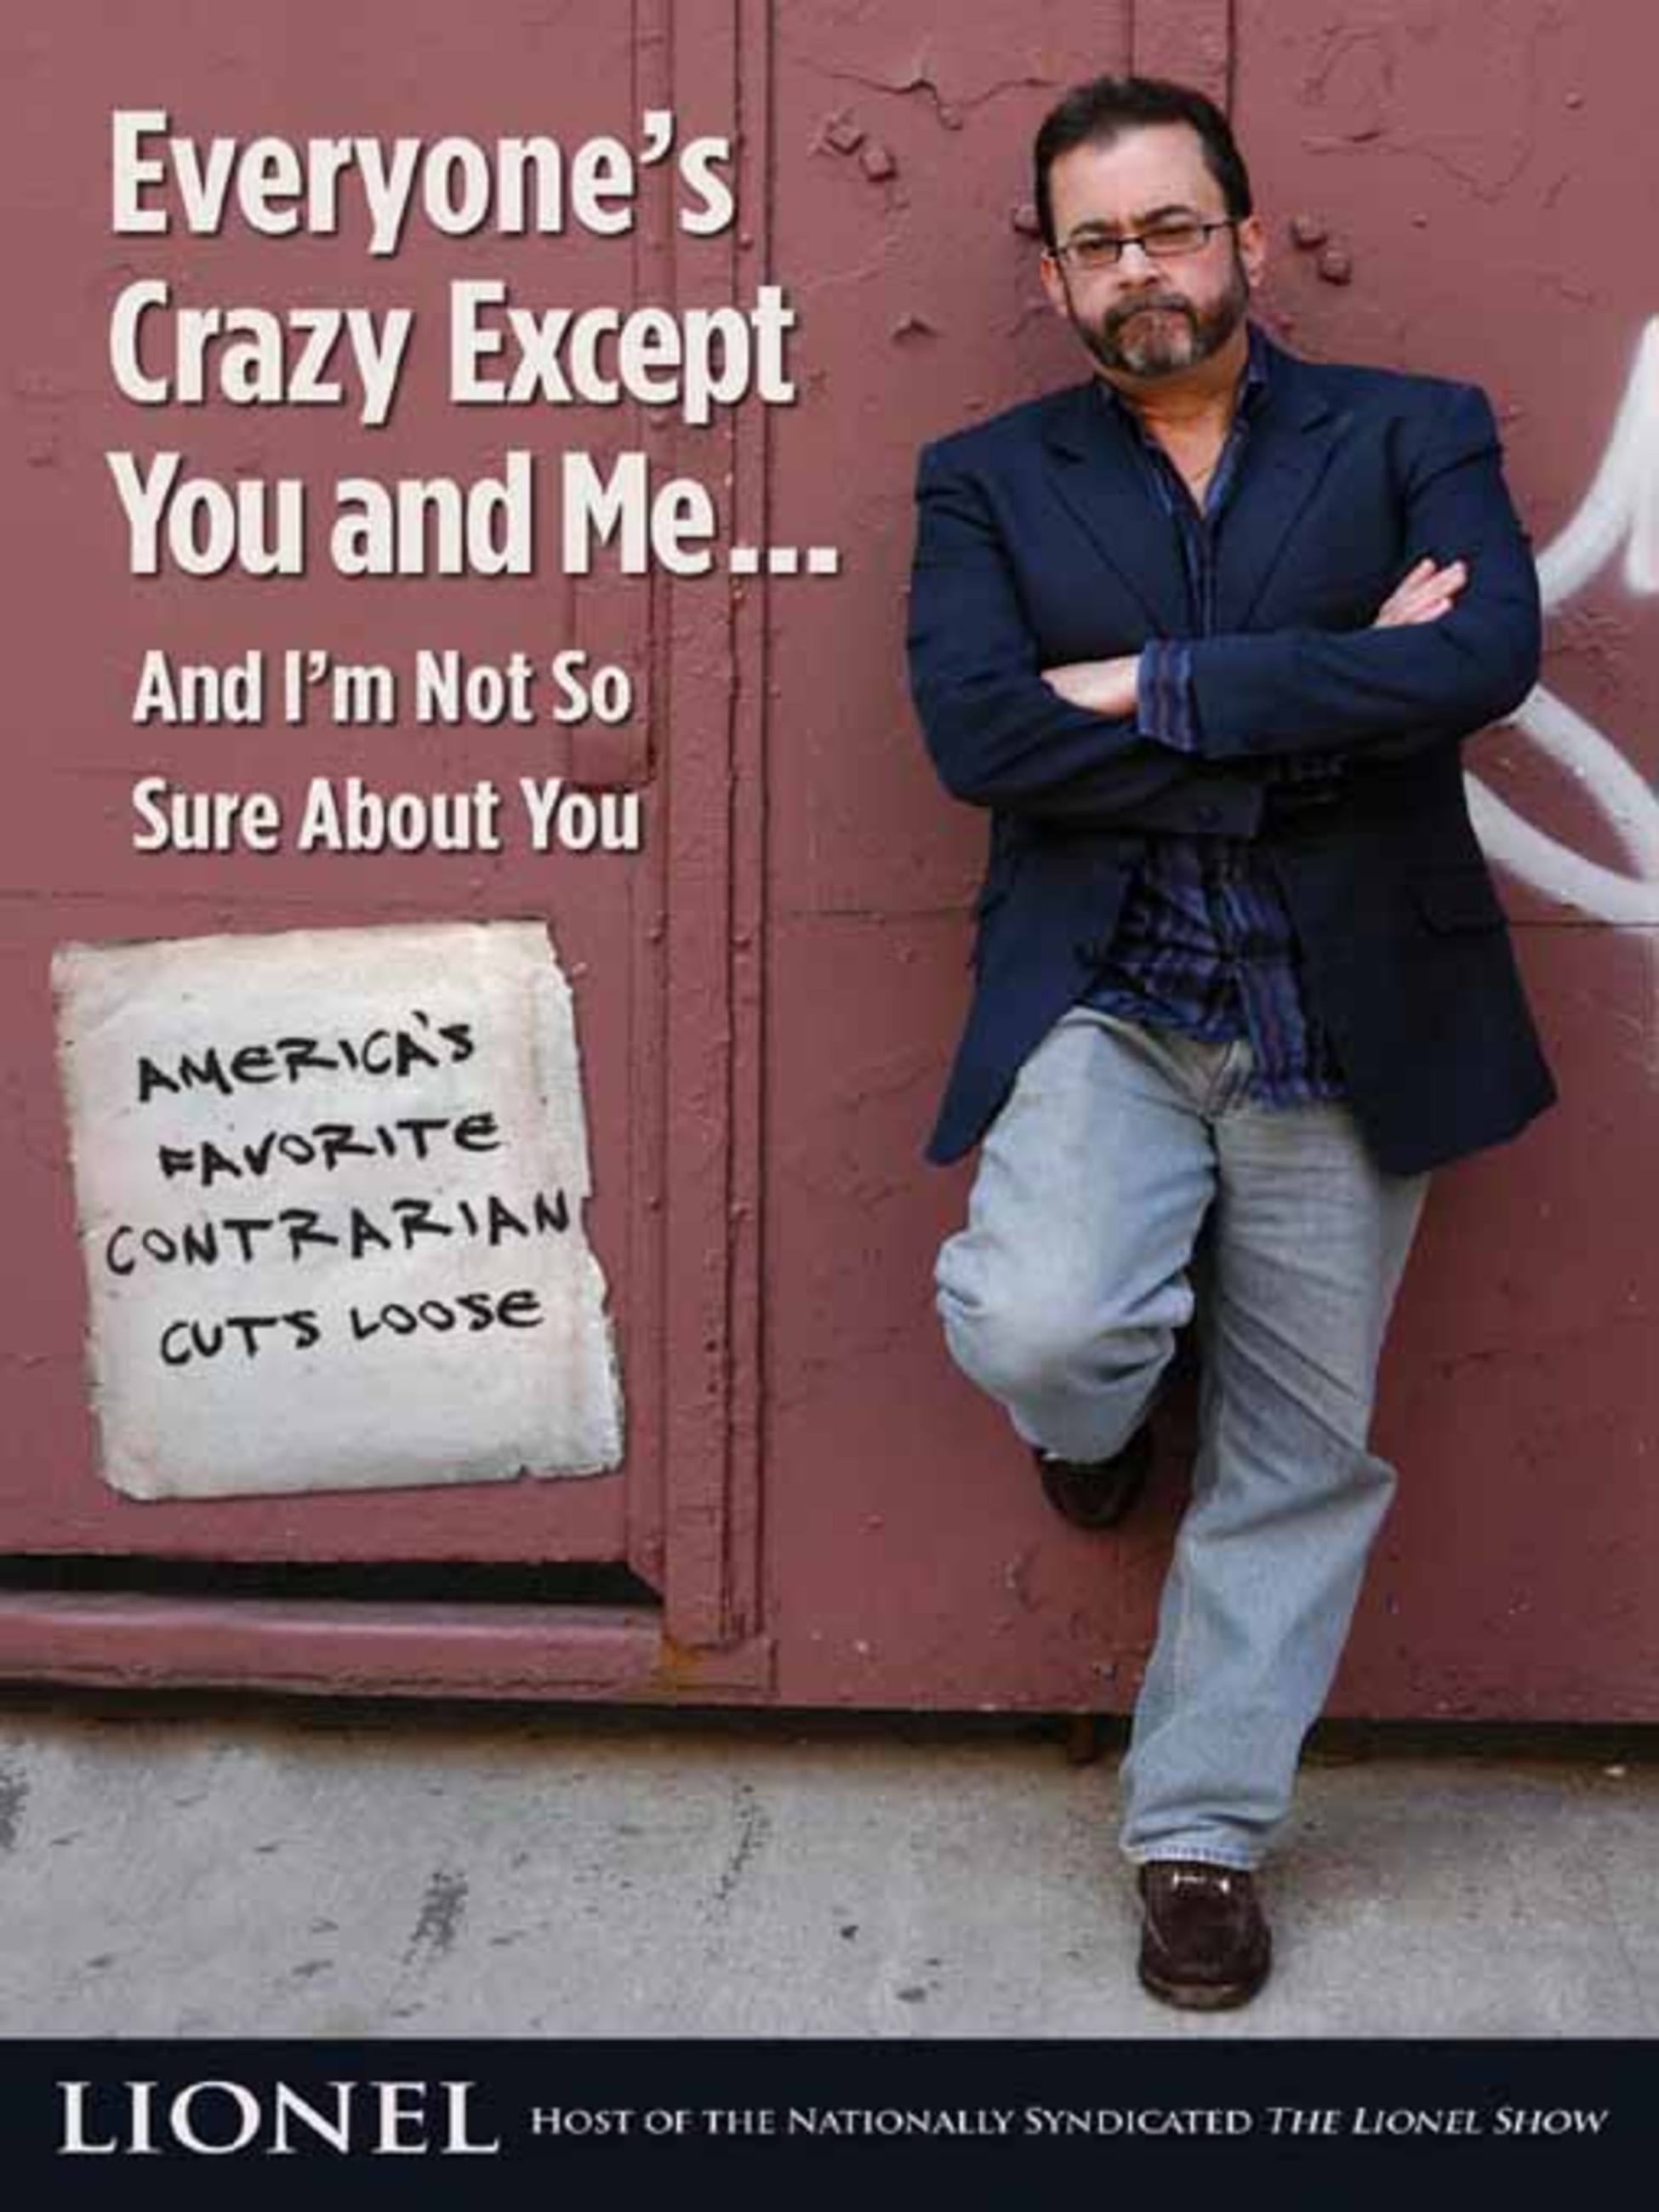 Everyones Crazy Except You and Me...And Im Not So Sure About You by Lionel Hachette Book Group image